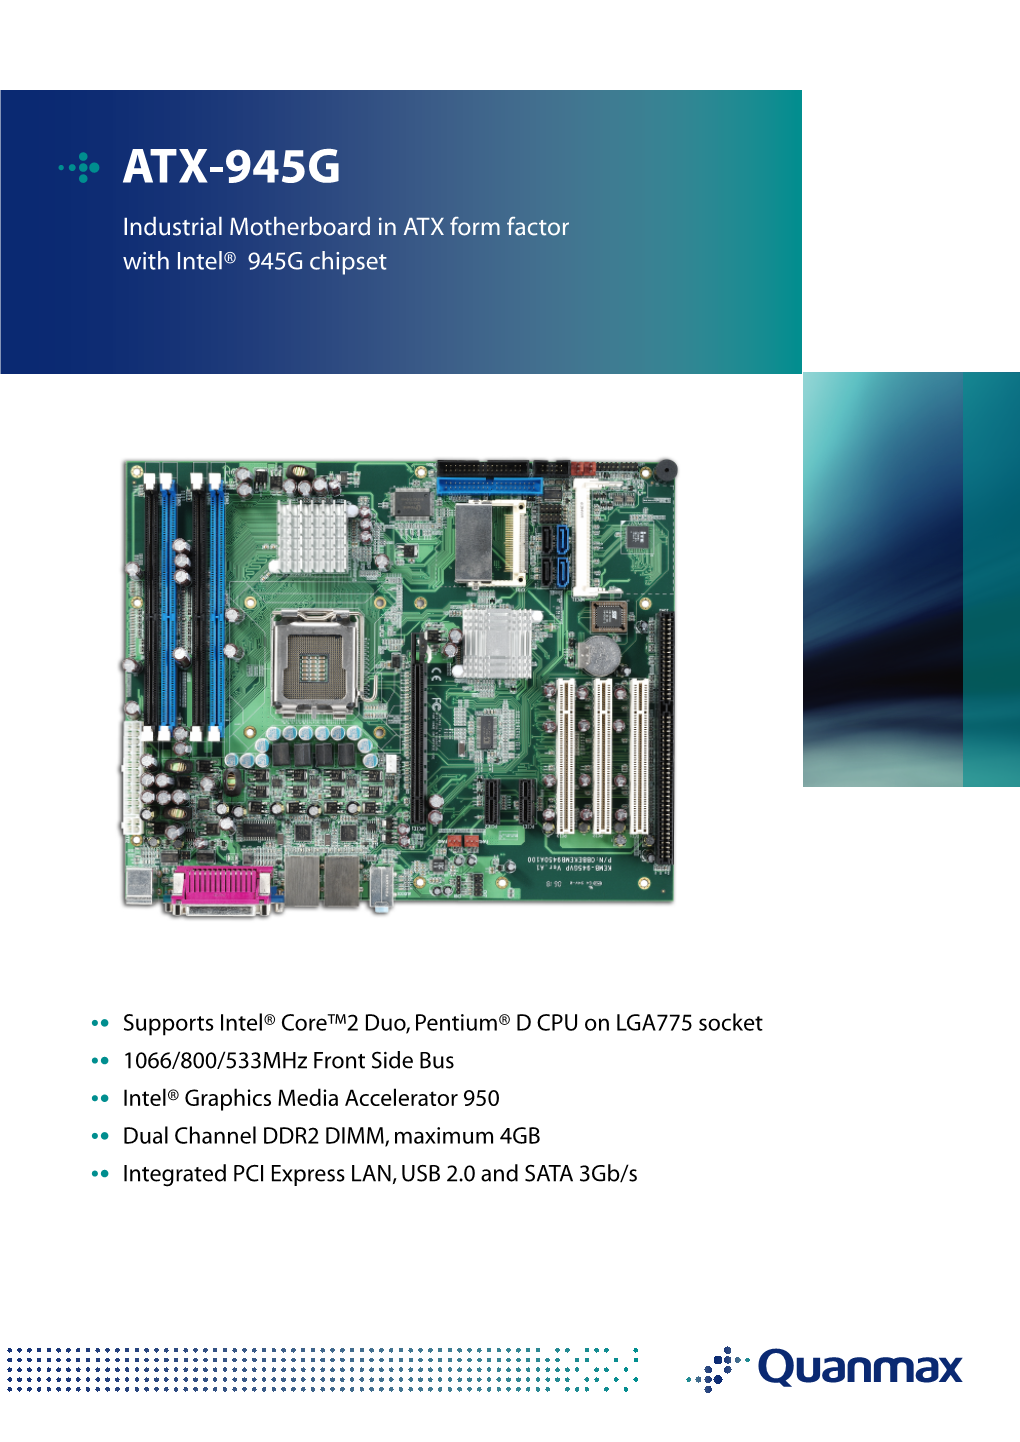 ATX-945G Industrial Motherboard in ATX Form Factor with Intel® 945G Chipset